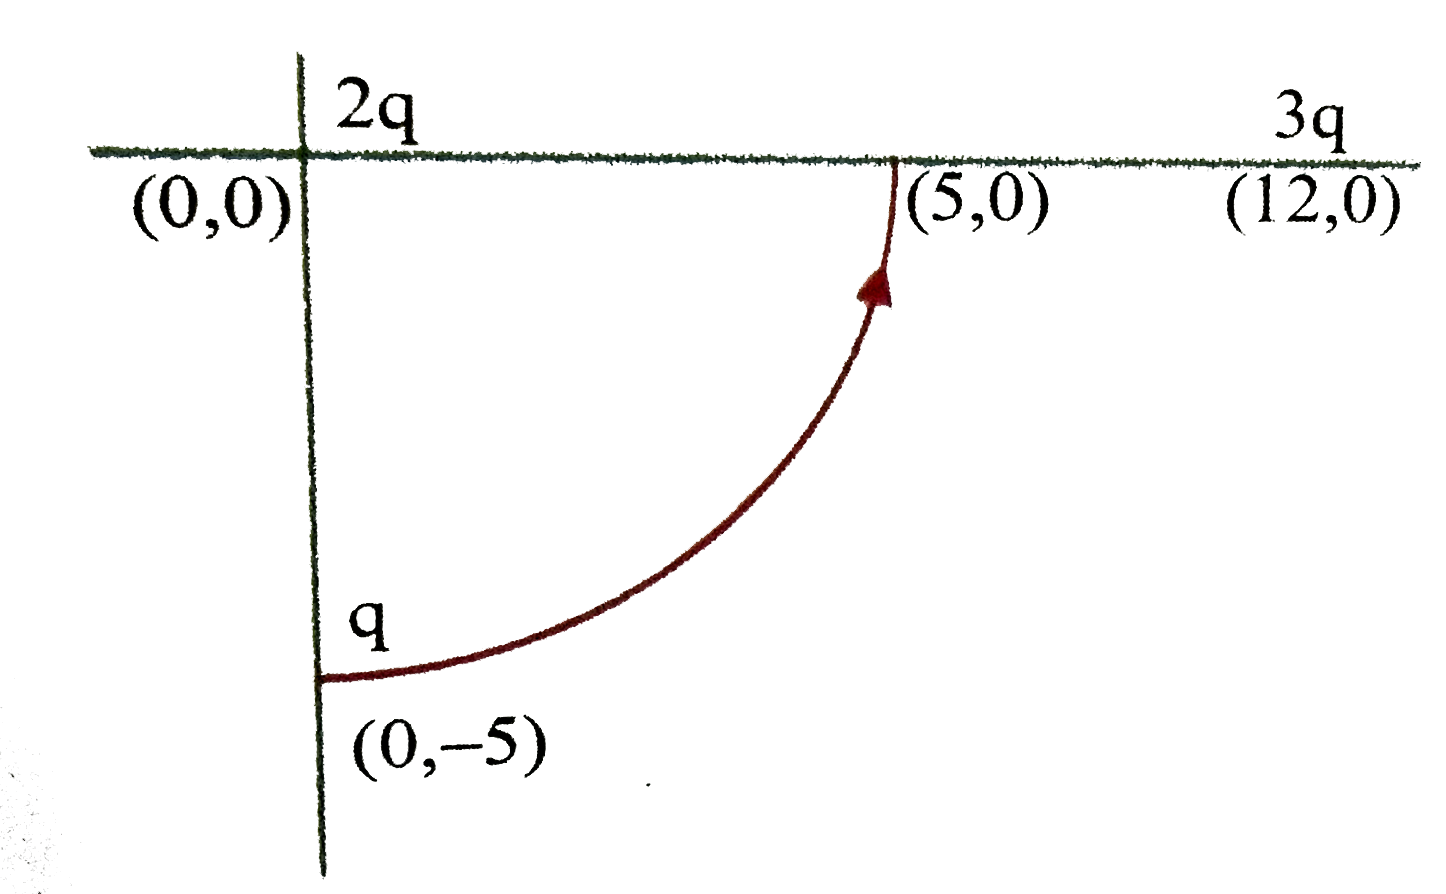 2q and 3q are two charges separated by a distance 12cm on x-axis .A third charge q is placed at 5cm on y-axis as shown in figure .Find the change in potential energy of the system if 3q is moved from initial position to a point on X-axis in circular path